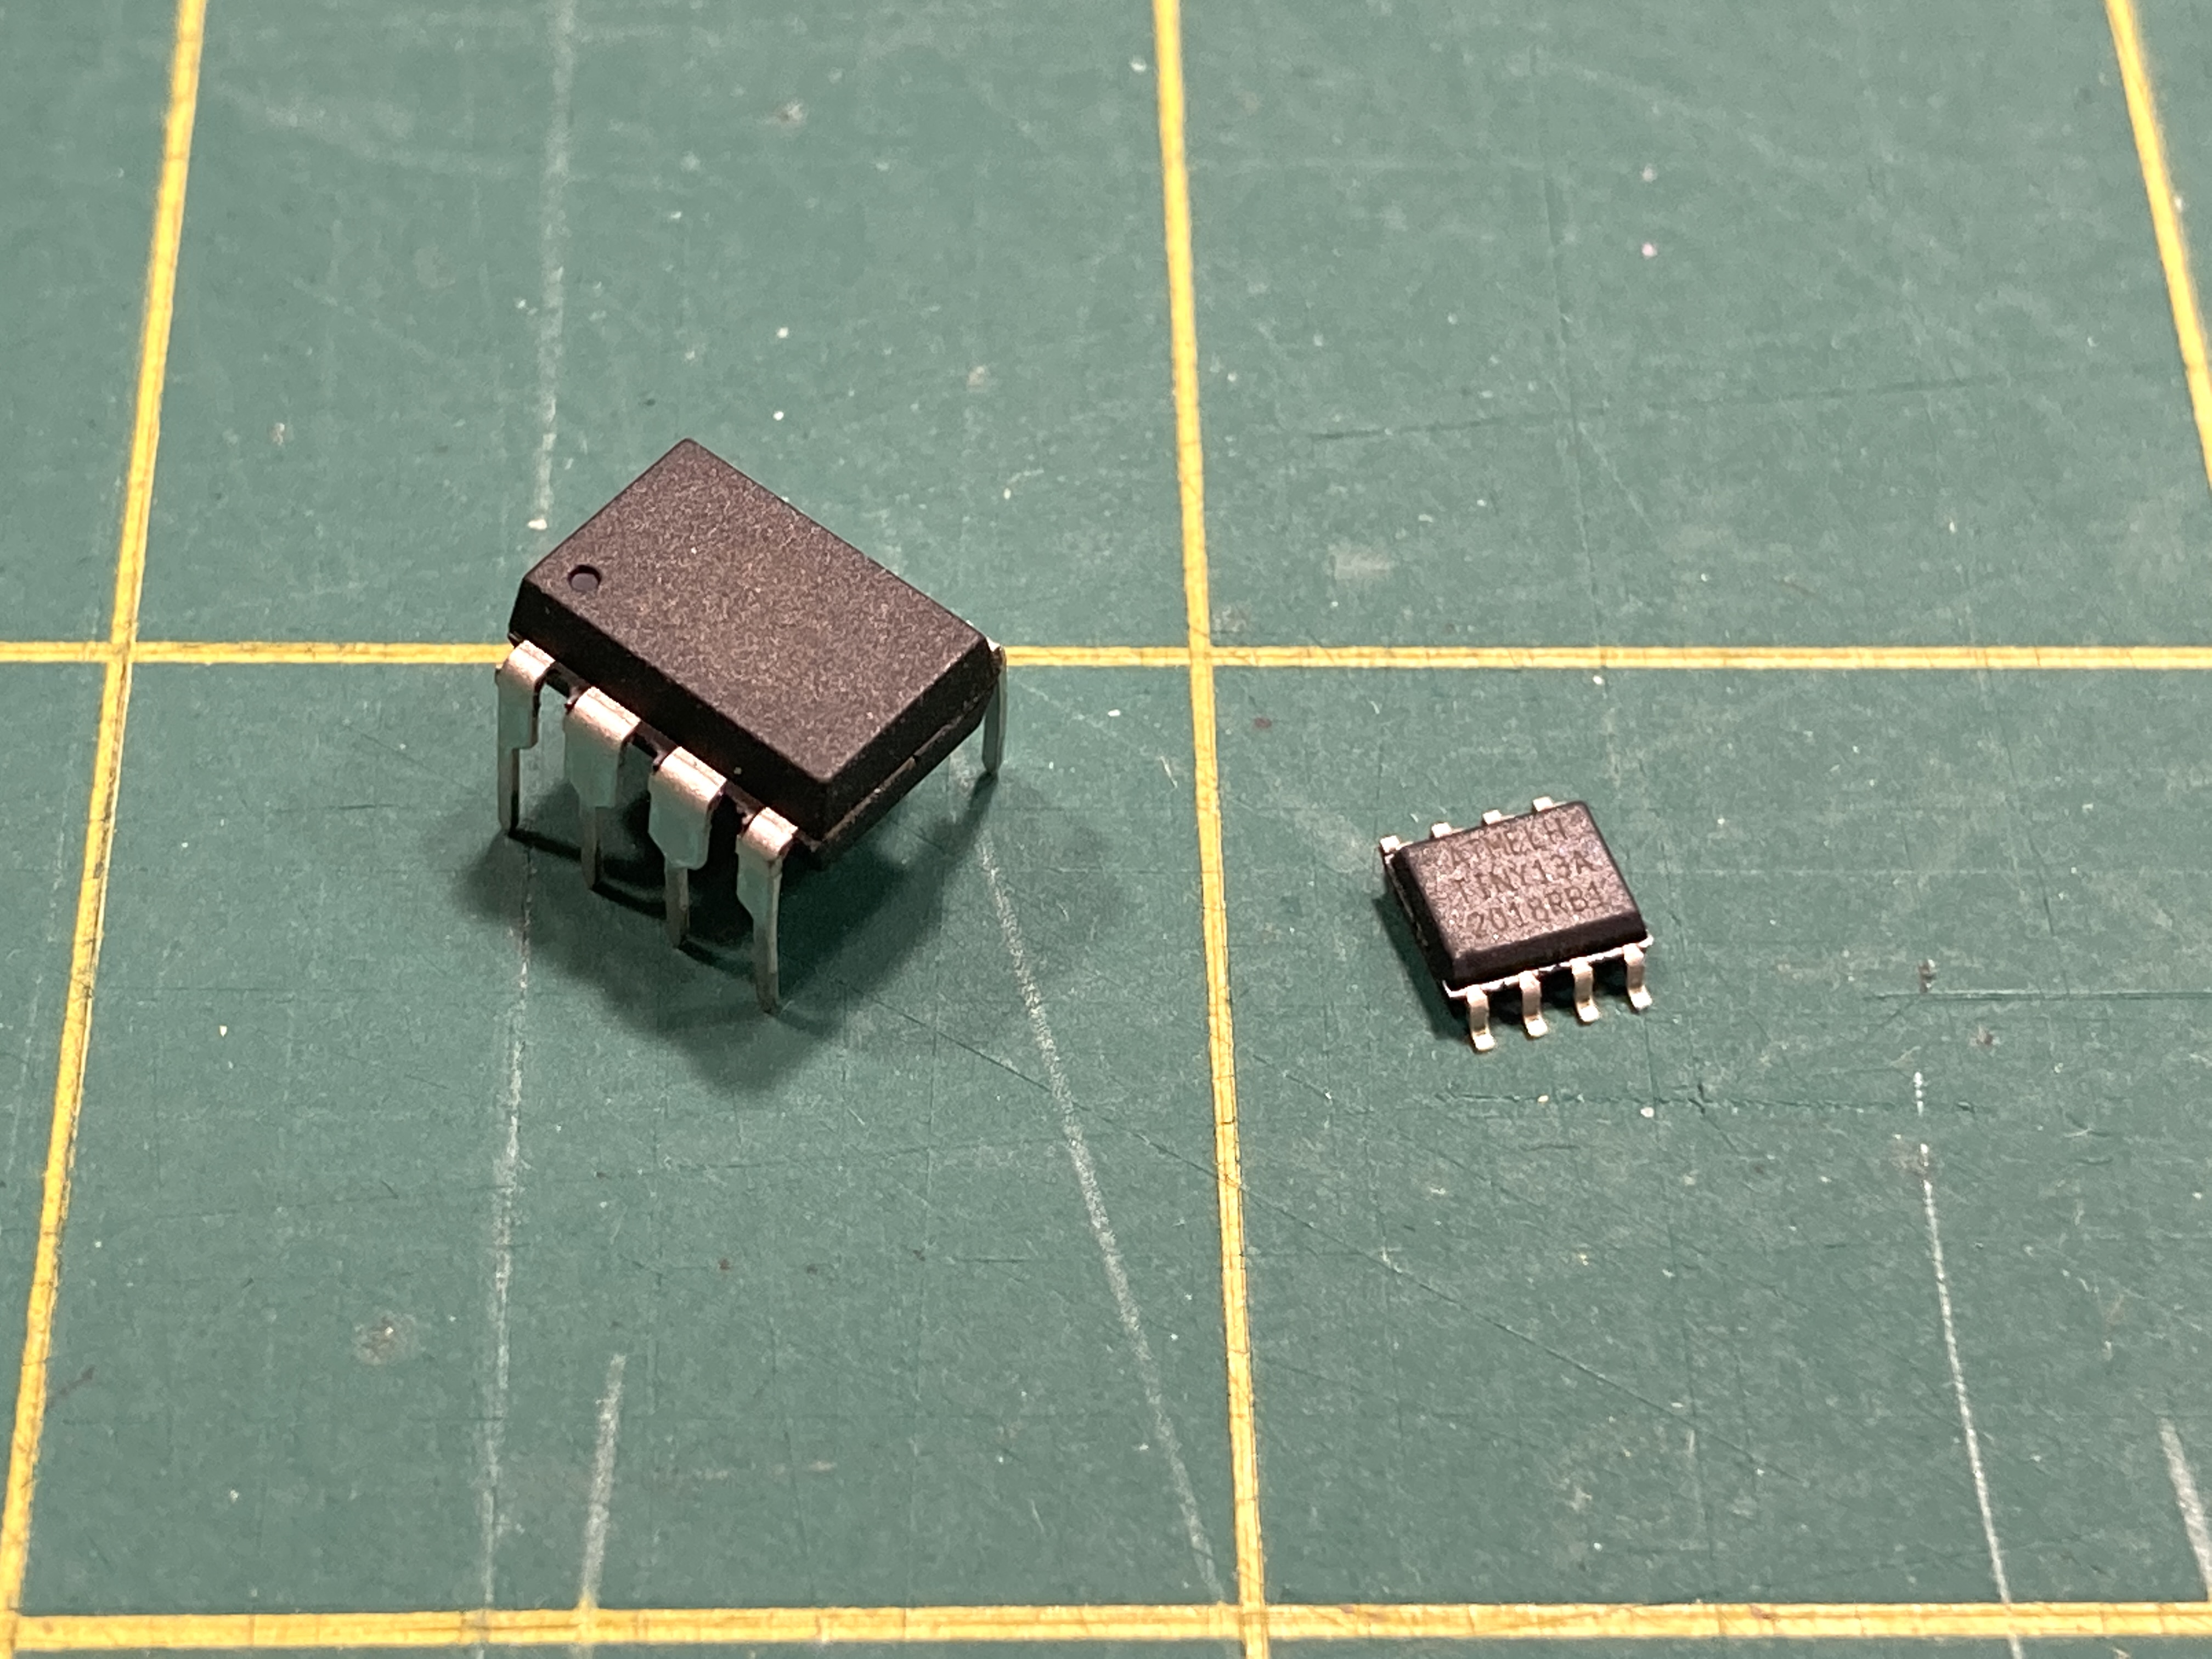 ATTiny13a DIP and SOIC packages